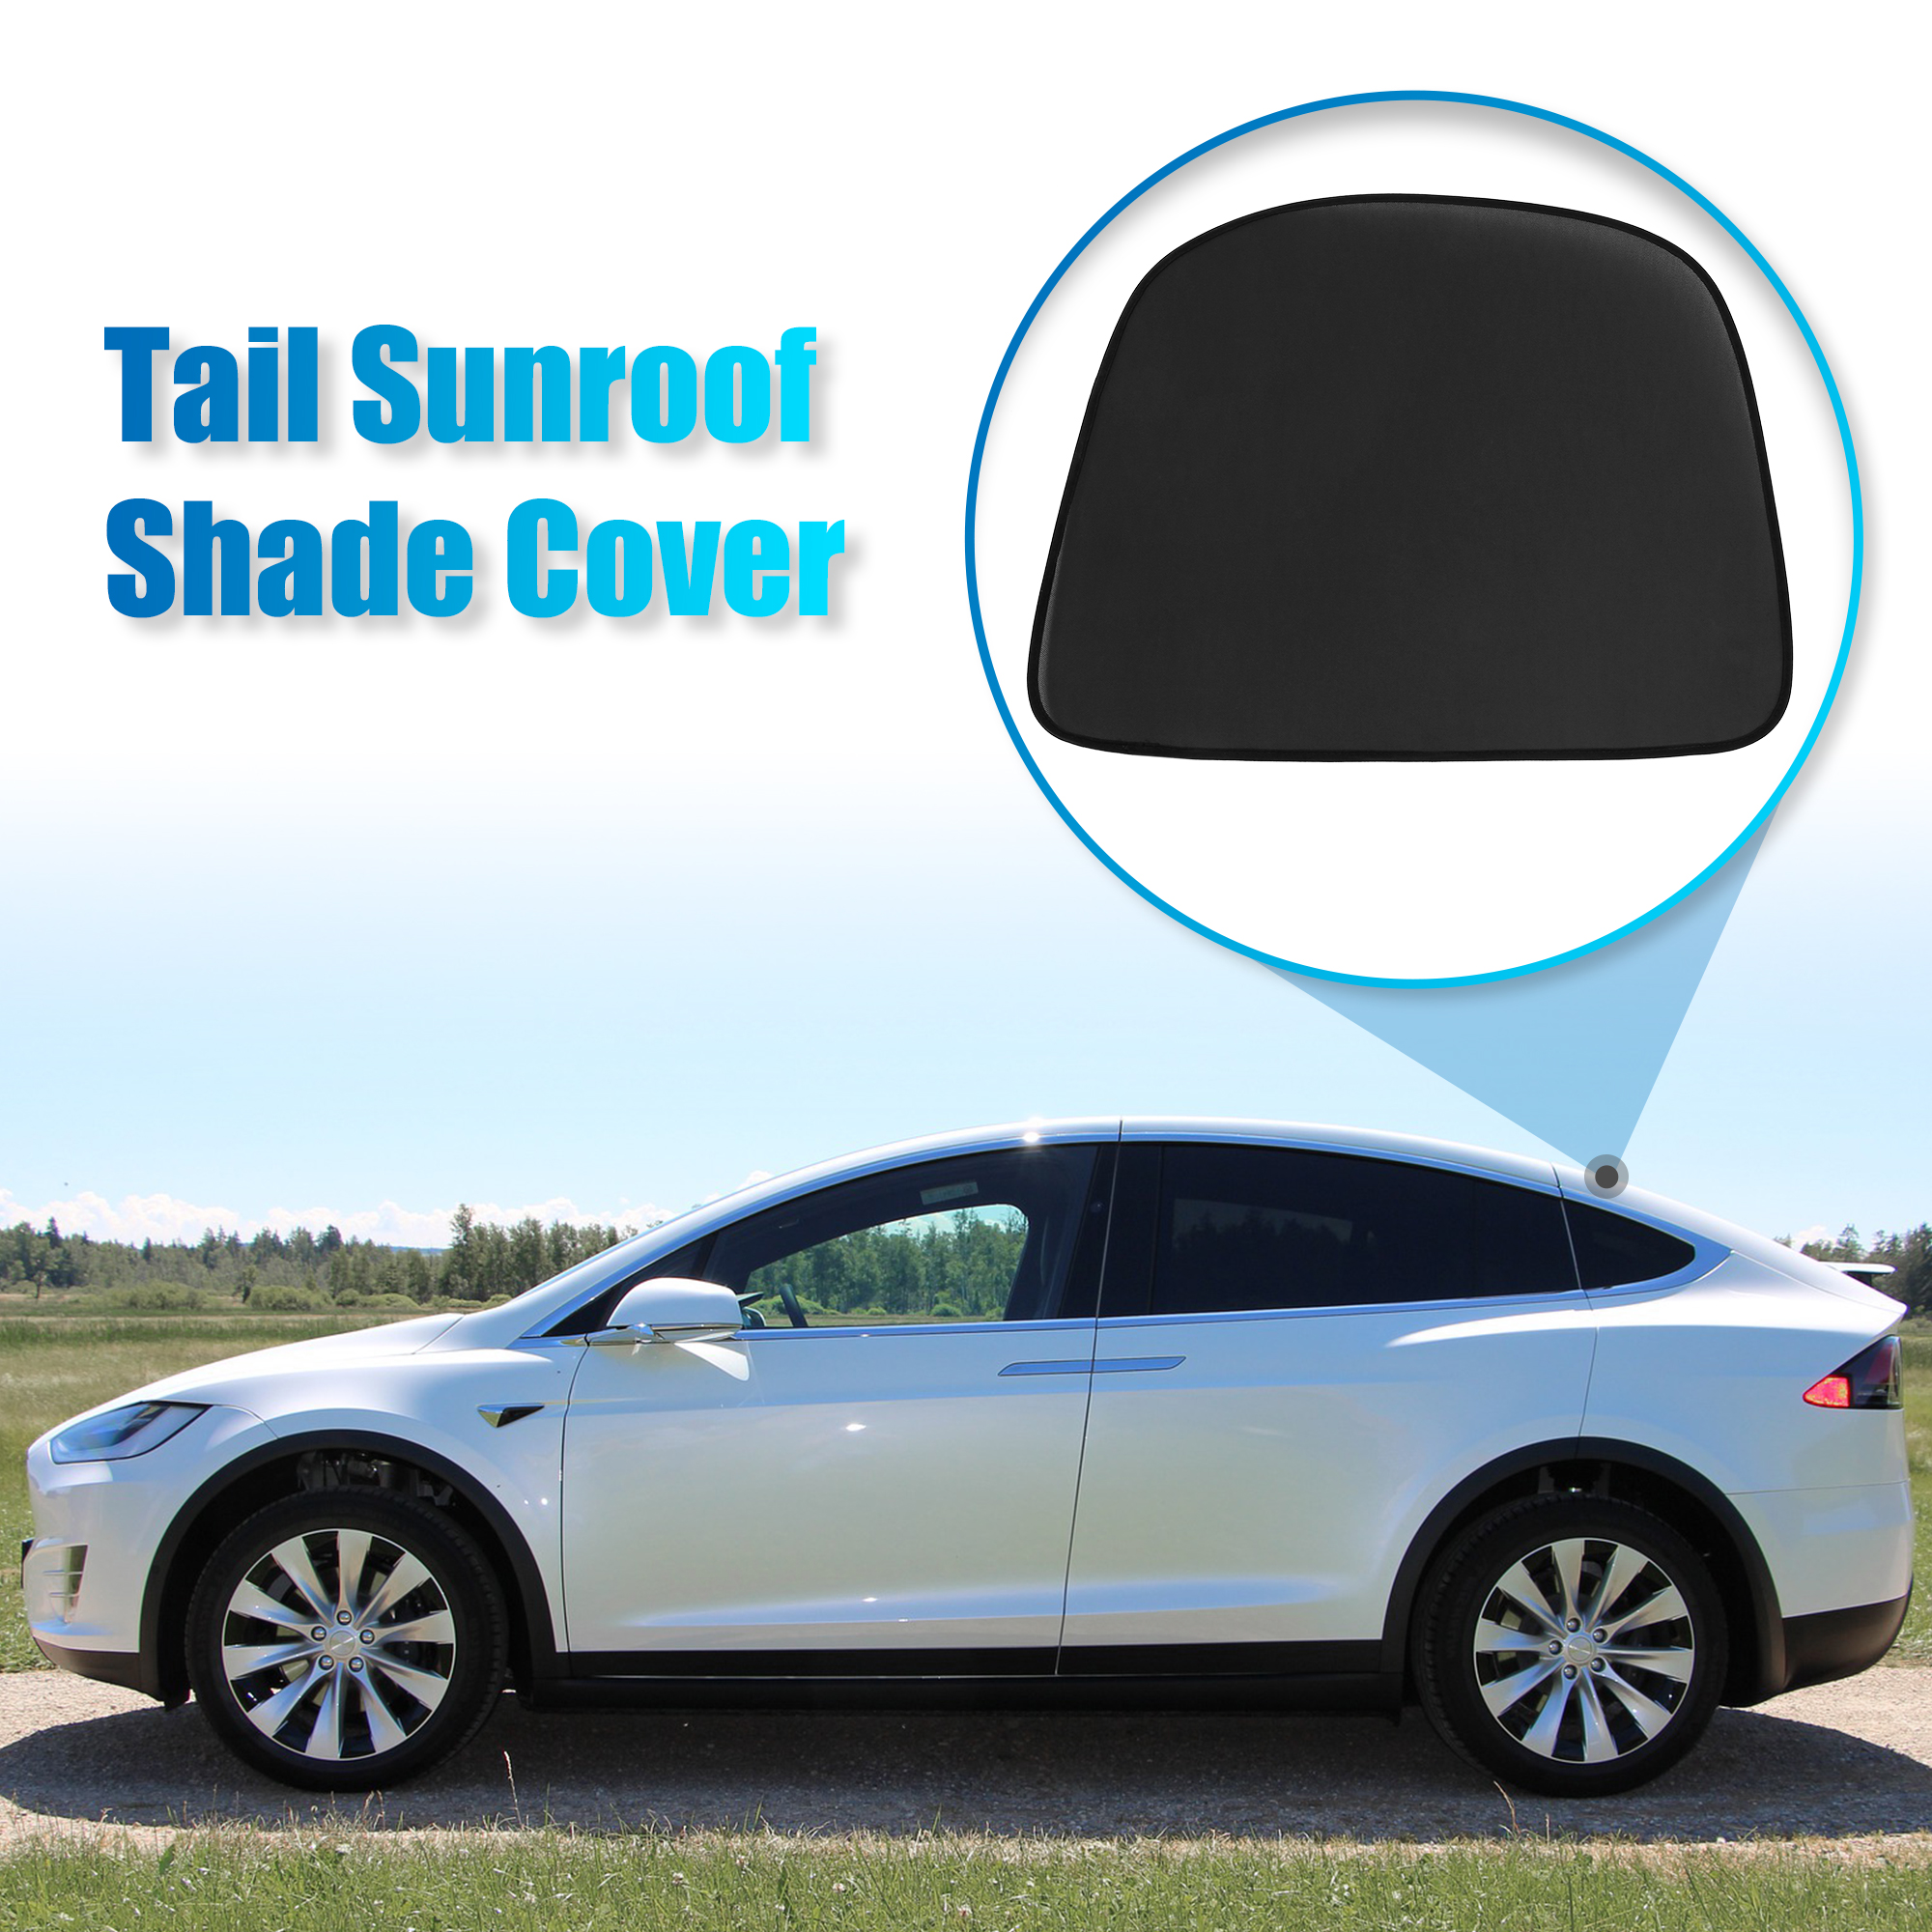 Unique Bargains Glass Roof Sunroof Shade Cover Tail Window Sun Shade for Tesla Model X Top Roof